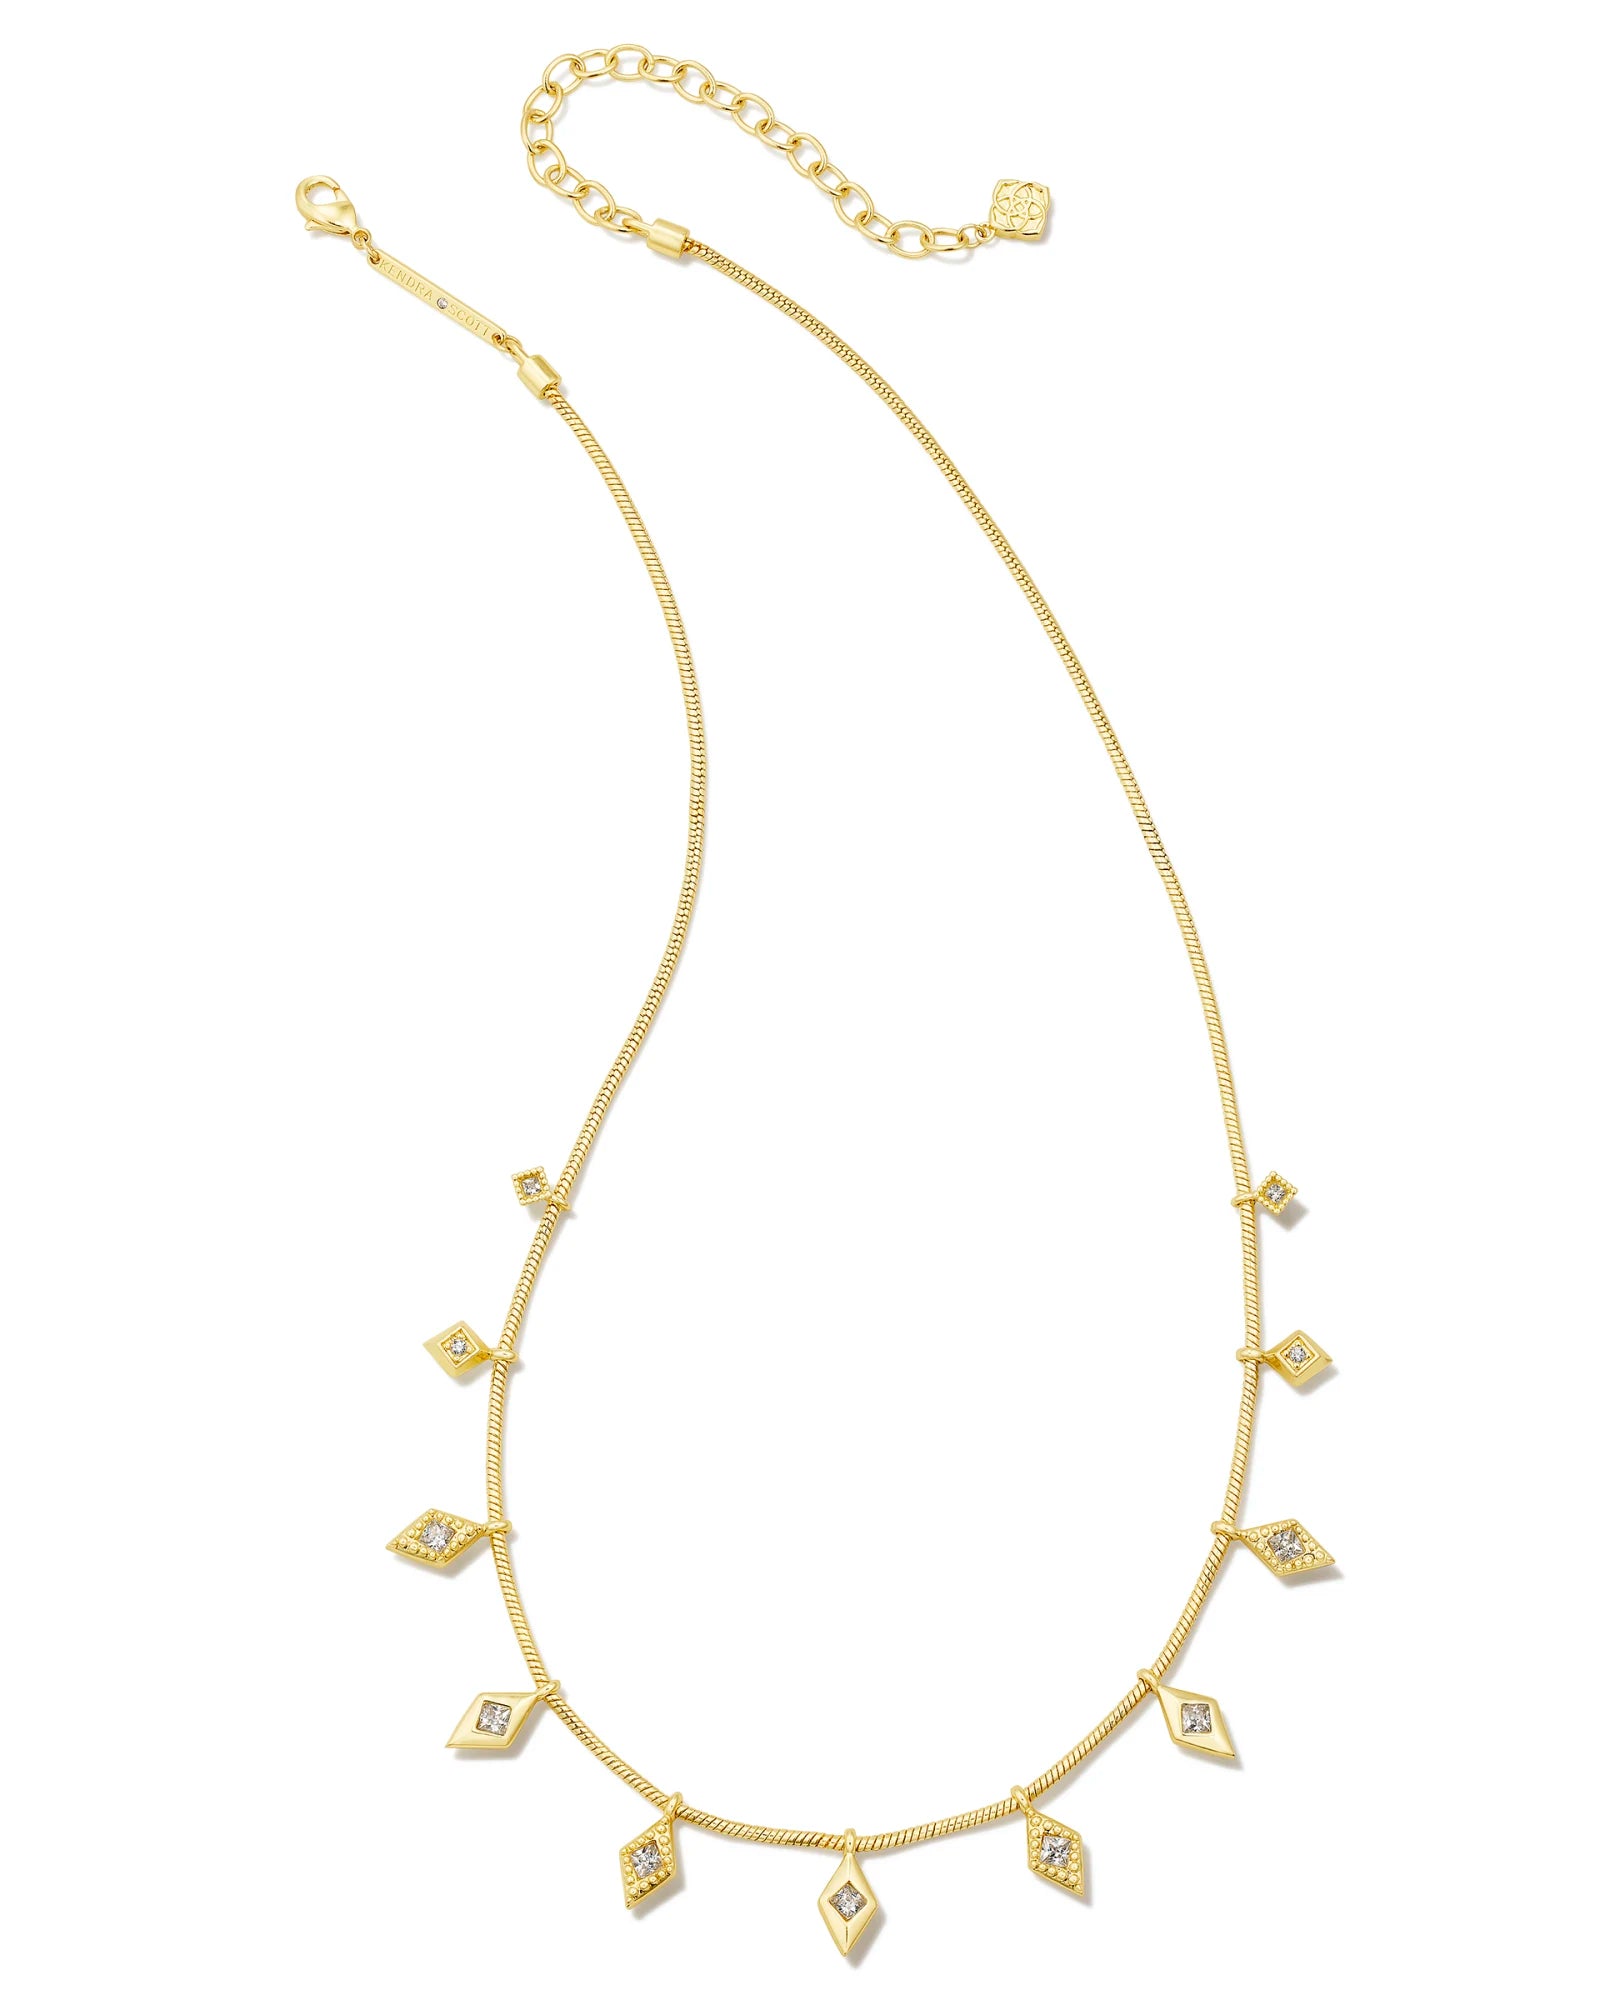 Kendra Scott Kinsley Strand Necklace Gold White CZ-Necklaces-Kendra Scott-N00326GLD-The Twisted Chandelier